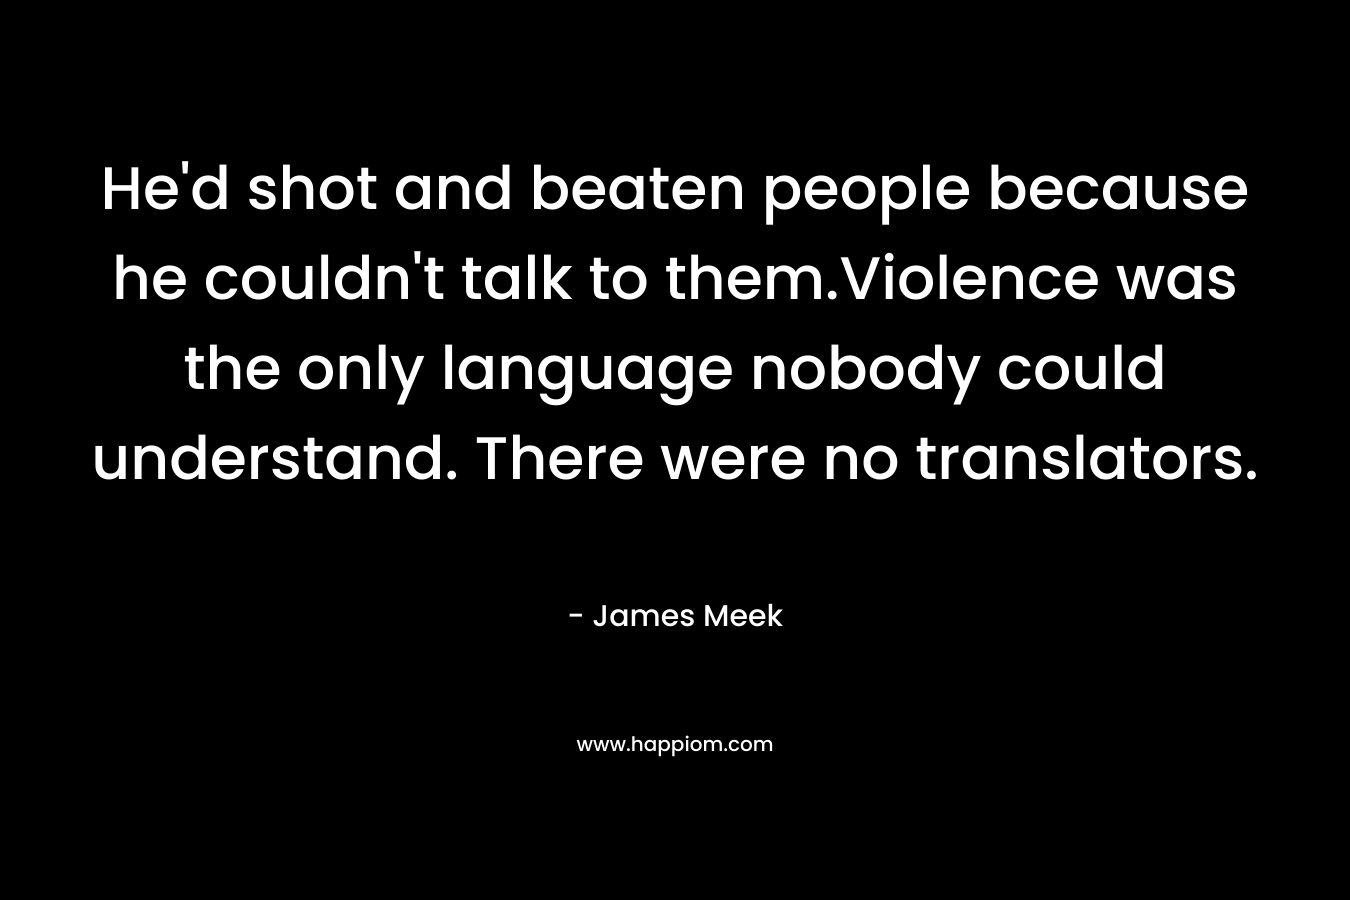 He'd shot and beaten people because he couldn't talk to them.Violence was the only language nobody could understand. There were no translators.